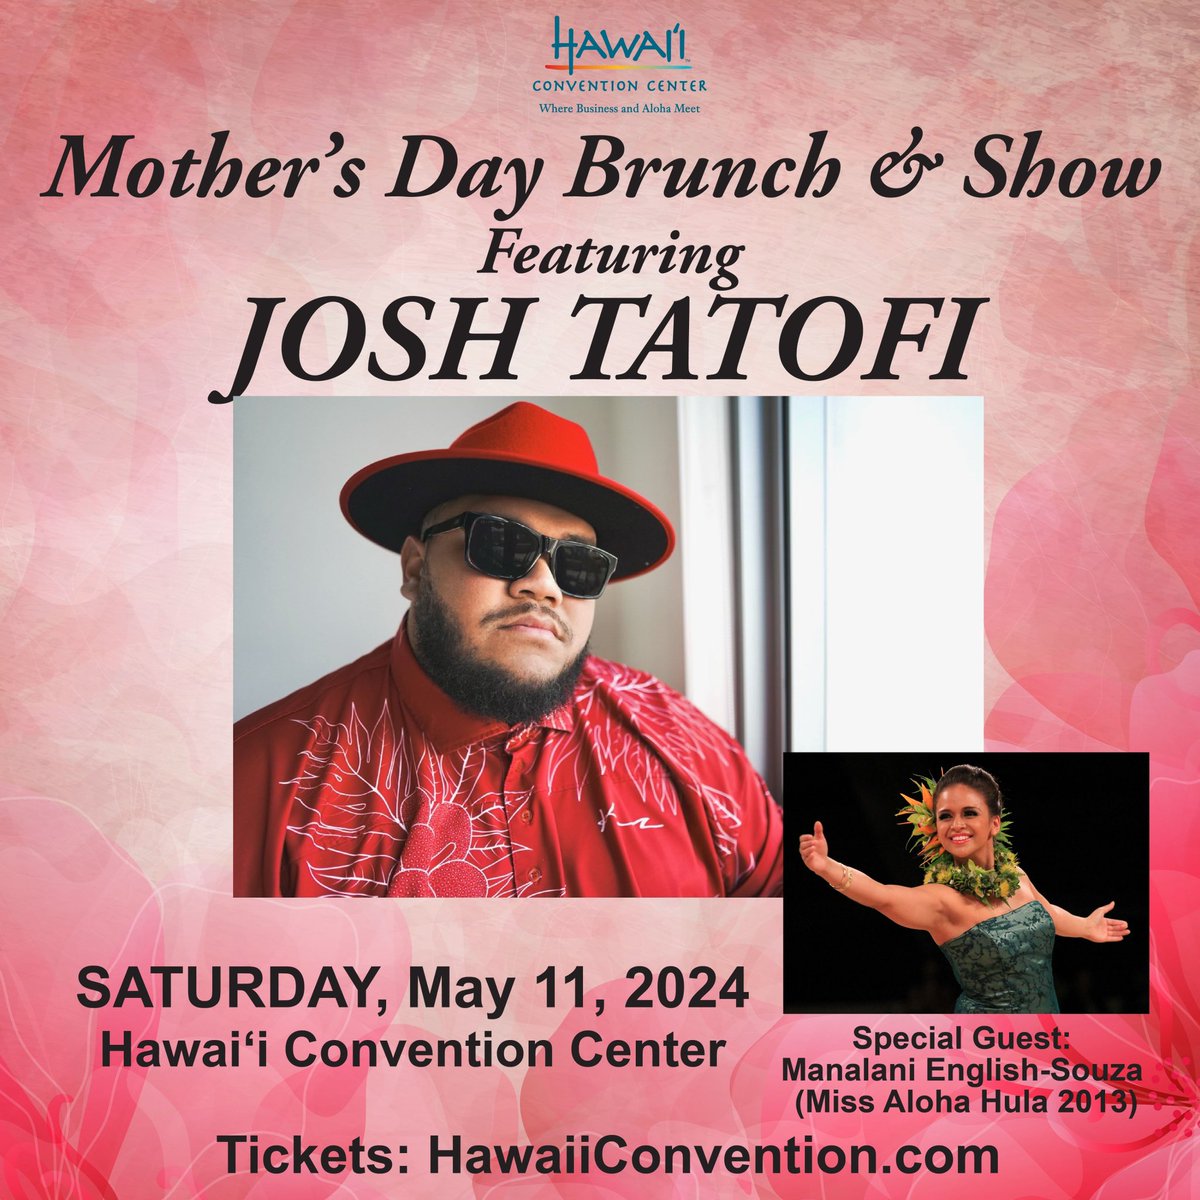 Join us in kicking off Mother’s Day weekend! SATURDAY, May 11. Treat Mom & the entire ohana to a special brunch and show featuring Grammy nominee and Na Hoku Hanohano Award winner, Josh Tatofi! Special guest Manalani English-Souza (Miss Aloha Hula 2013) HawaiiConvention.com